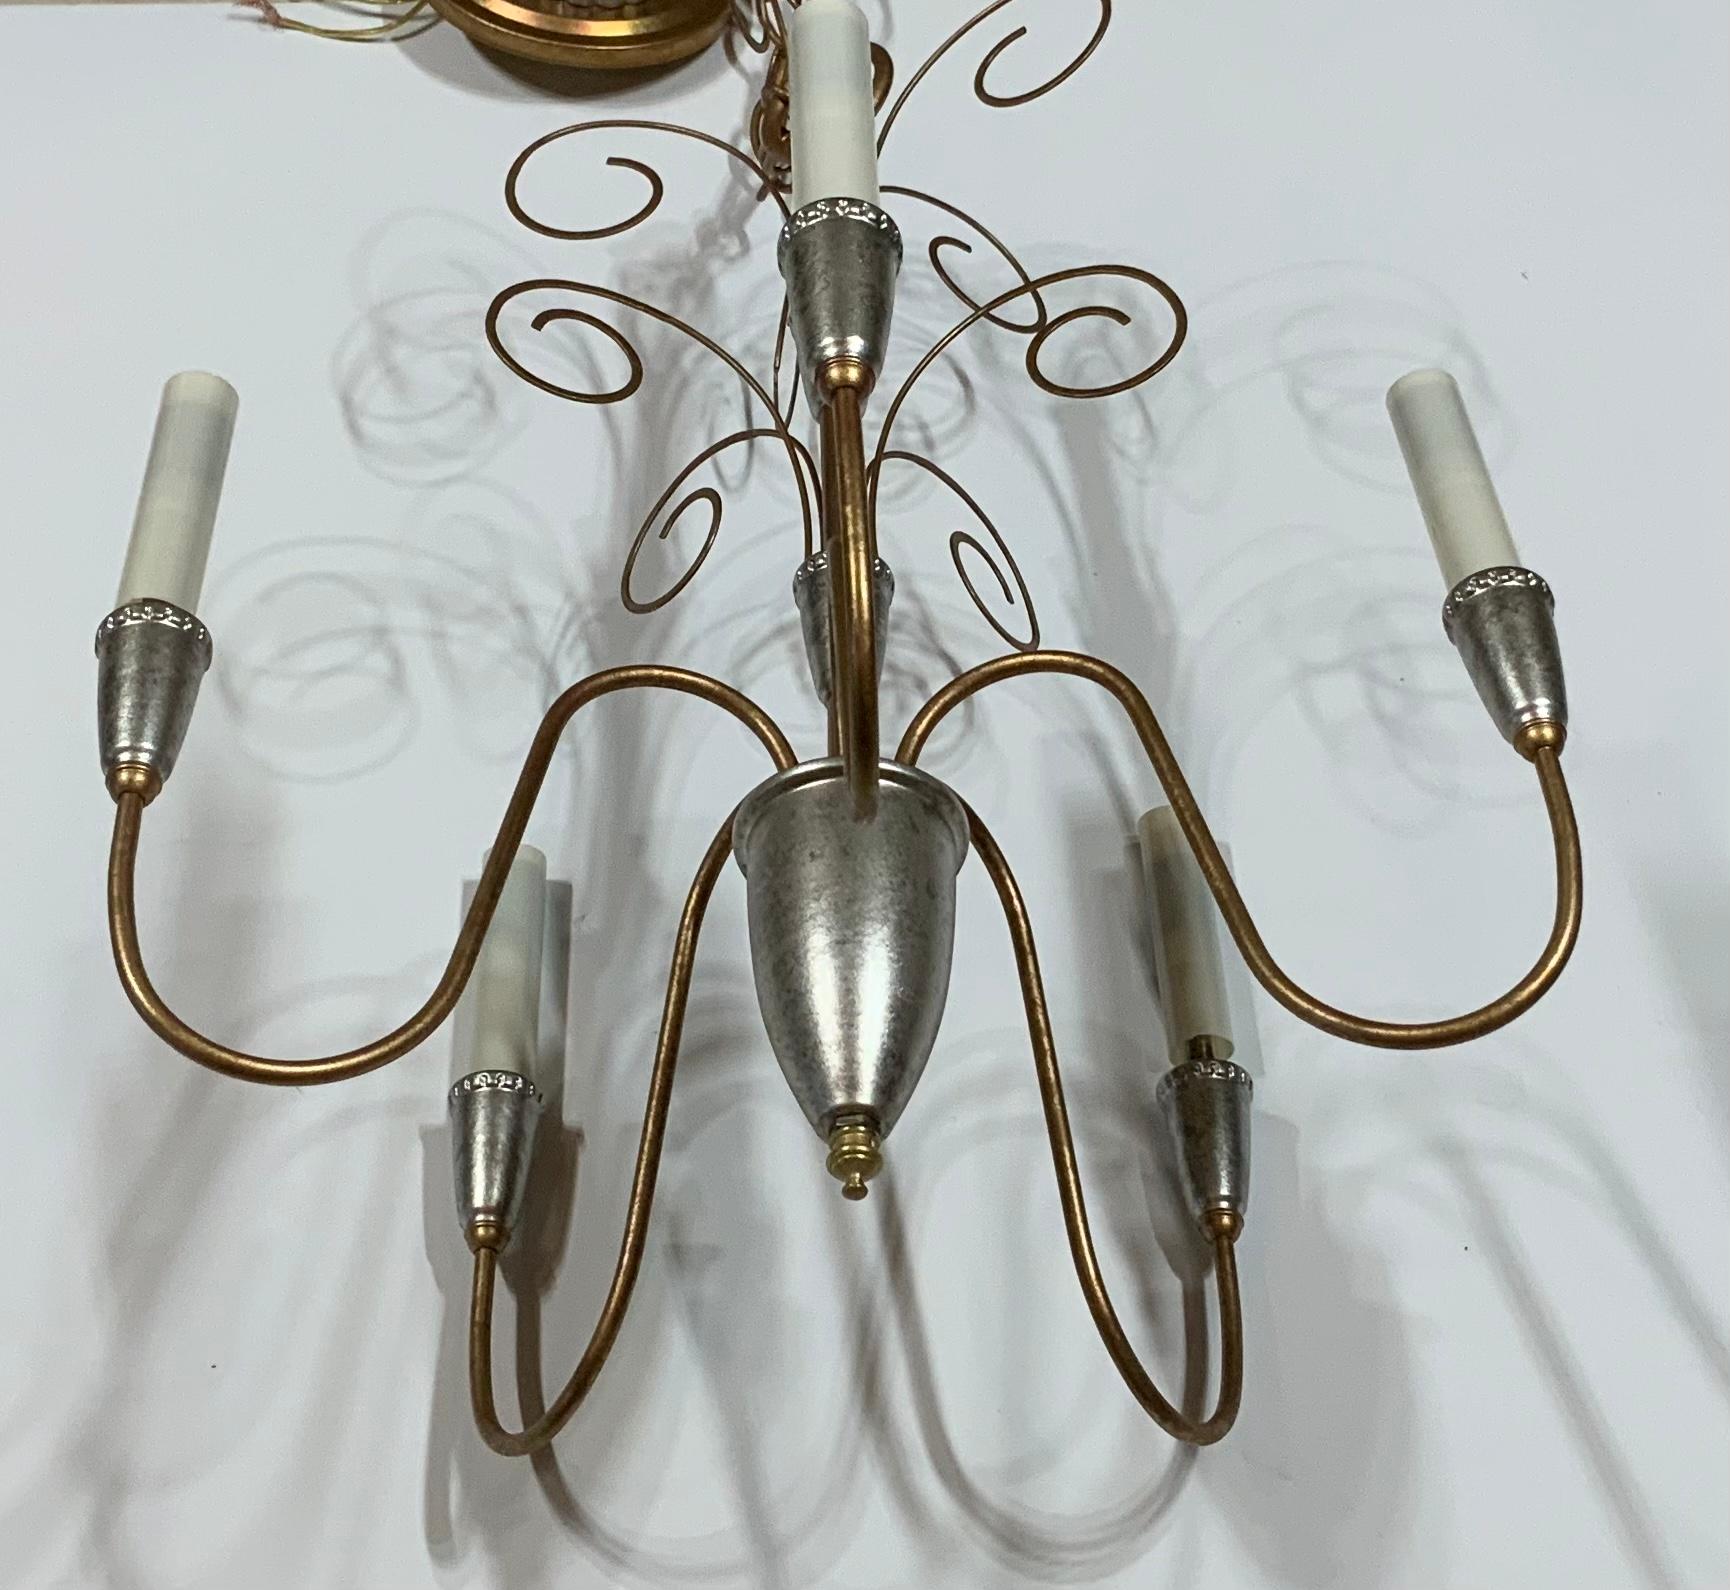 Elegant chandelier made of metal , painted in silver and gold ,with five stems 60/watt light each stem 
Electrified and ready to use. Beautiful and clean cut chandelier for any room 
One more is posted
Original canopy and chain included.
  